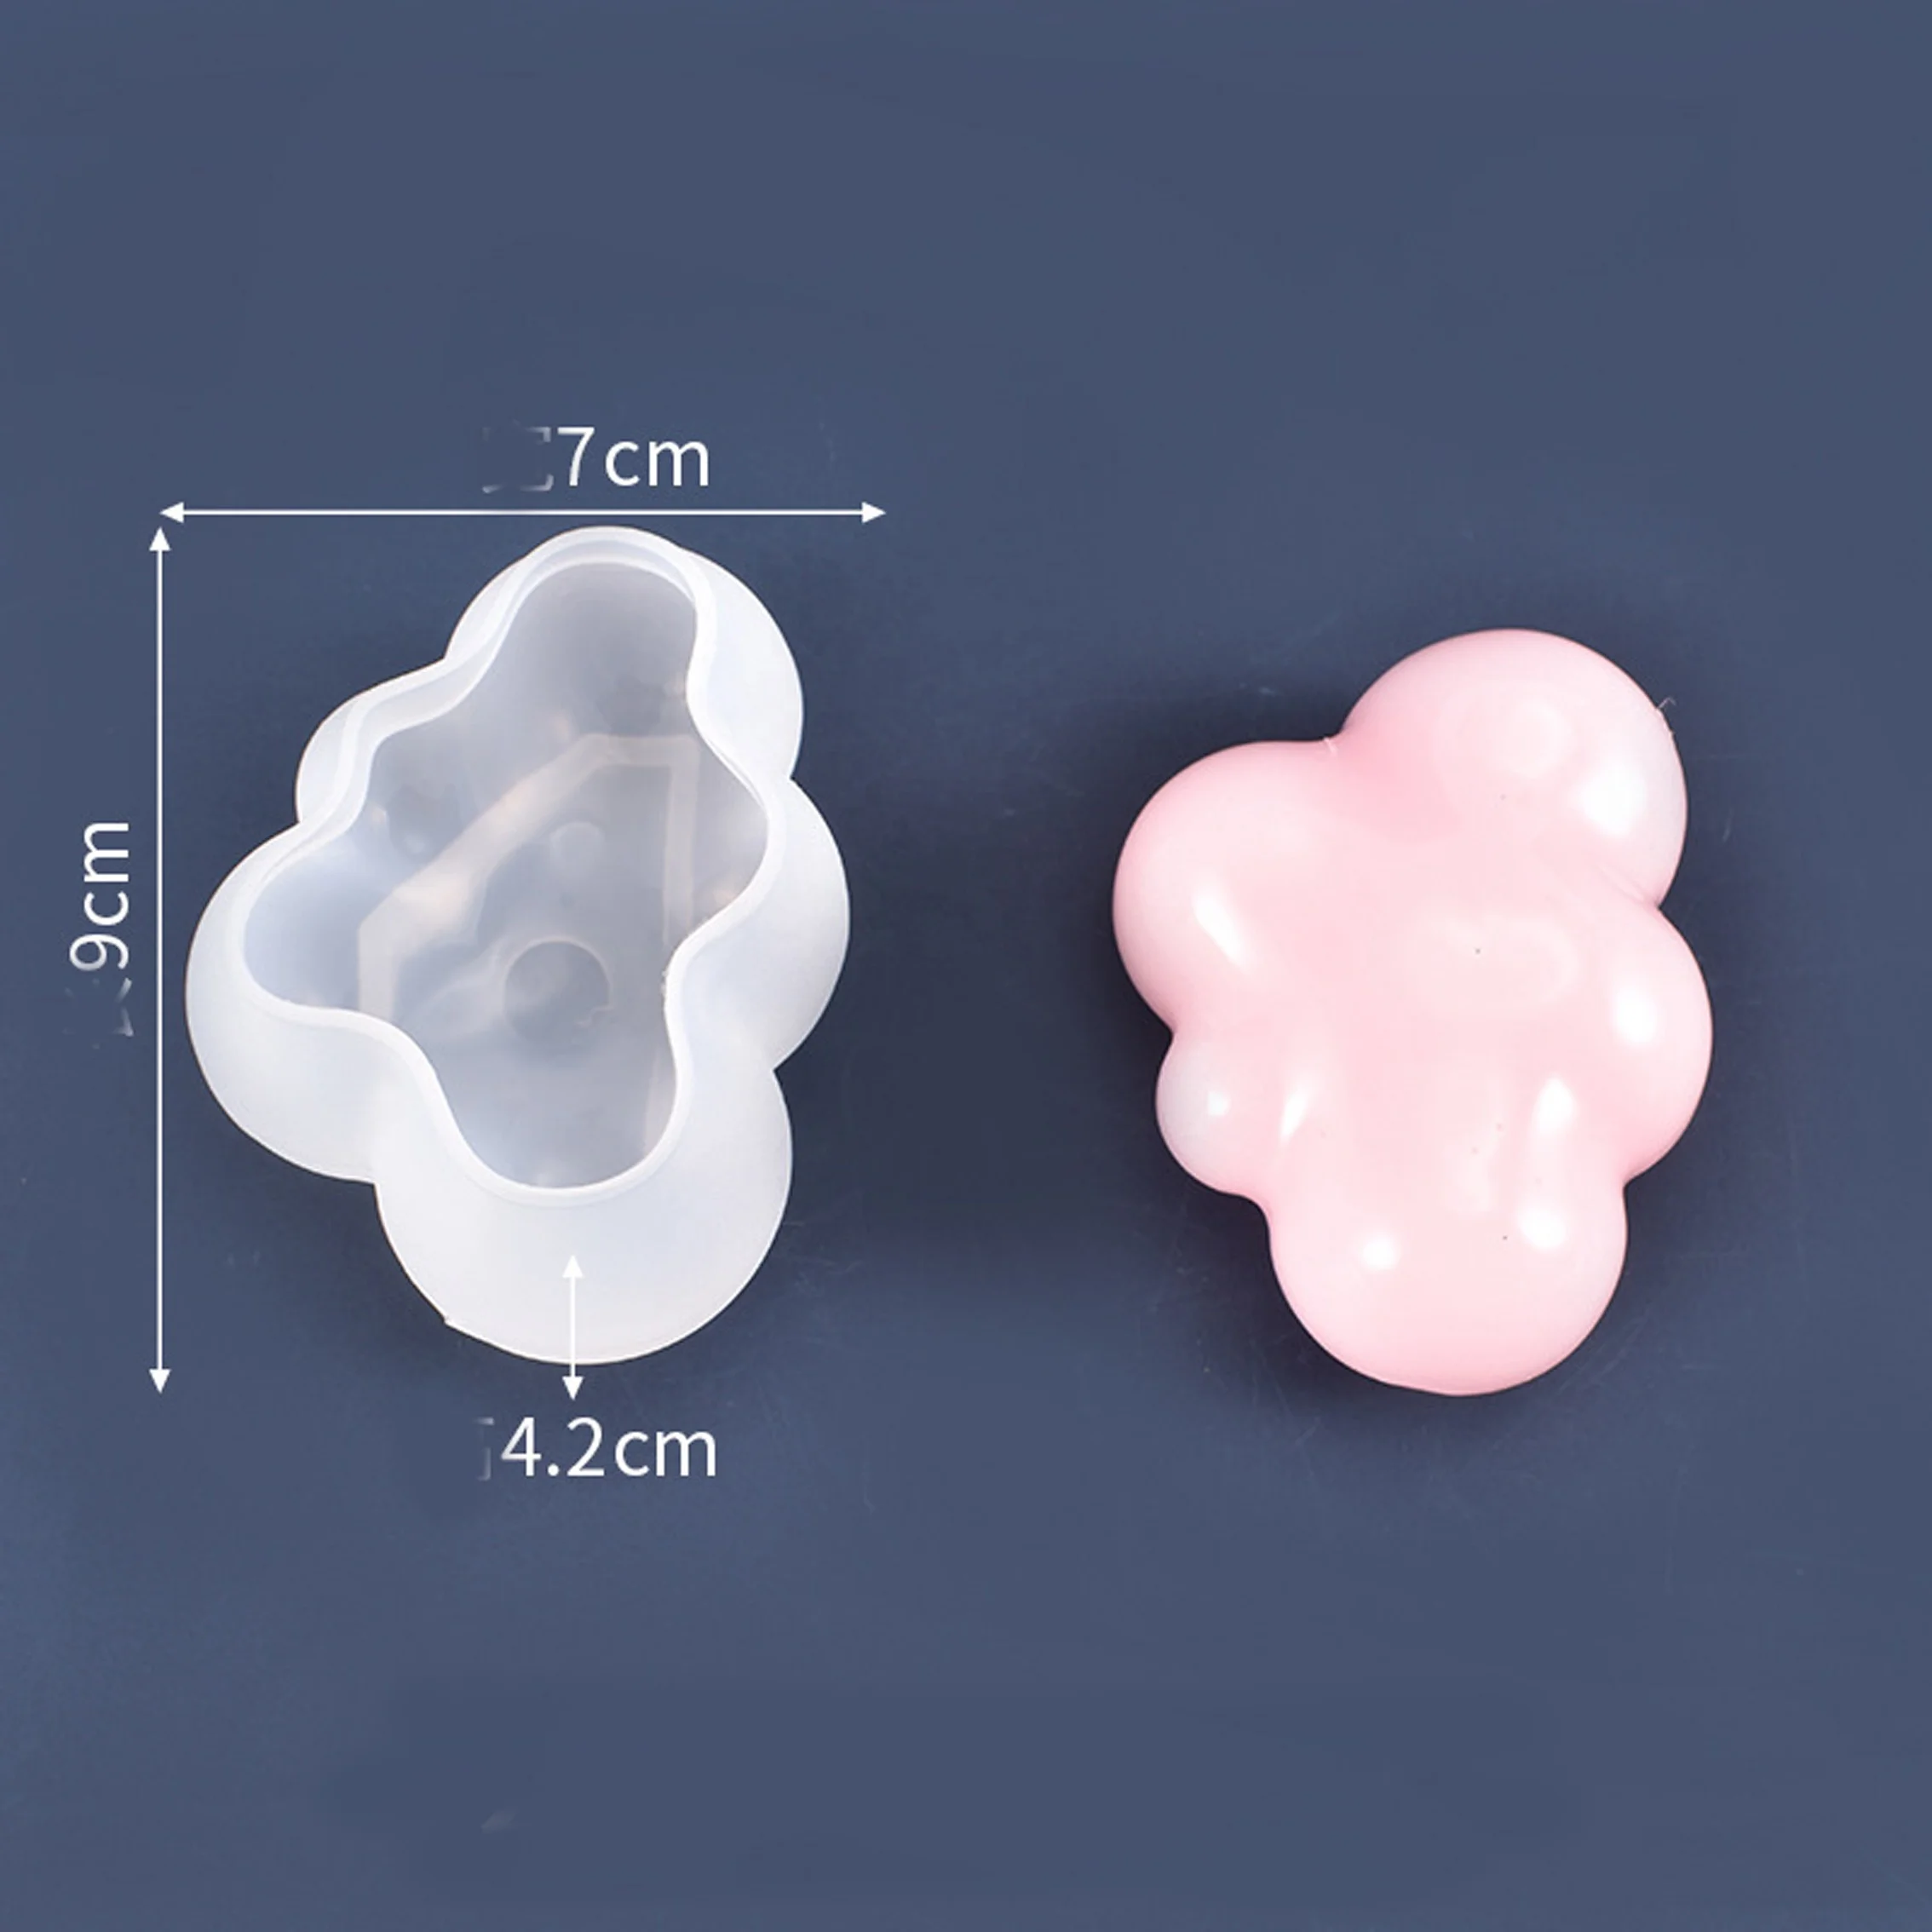 3D Cloud Shaped Mousse Fondant Ice Cube silicone Soap Silicone Cake Mold Chocolate Mold Cake Topper Tools